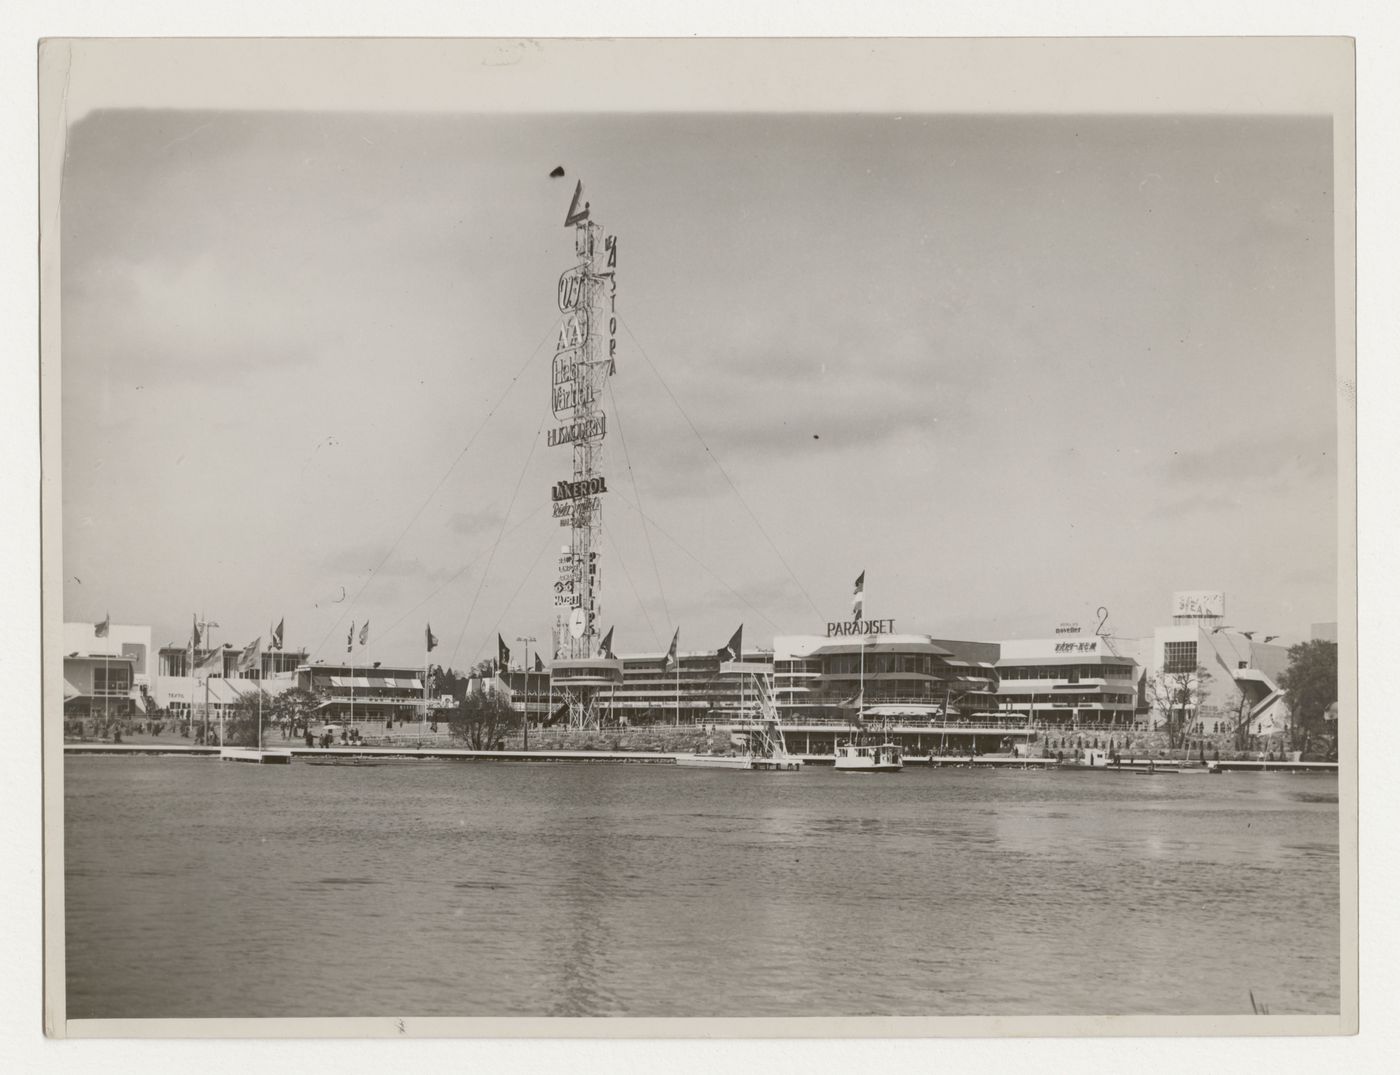 Exterior view of halls 26 and 27, the advertising mast, Paradise Restaurant and the Svea Rike building at the Stockholm Exhibition of 1930, Stockholm